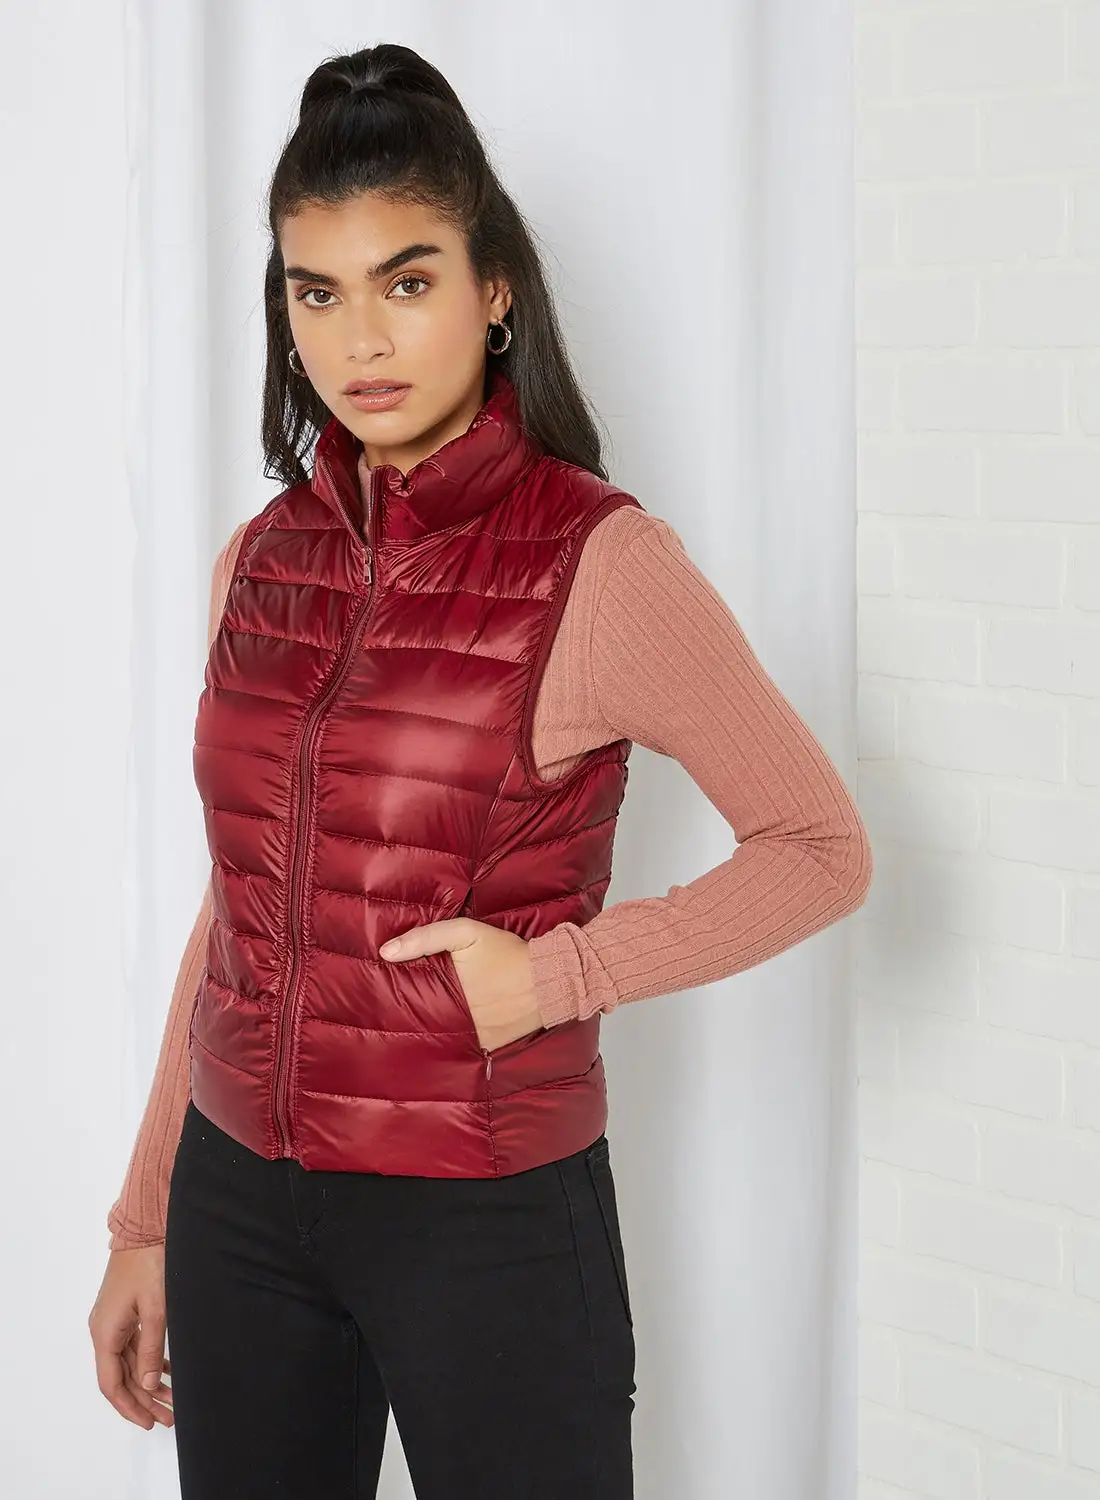 Anaqa Solid Design Sleeveless Down Jacket Wine Red